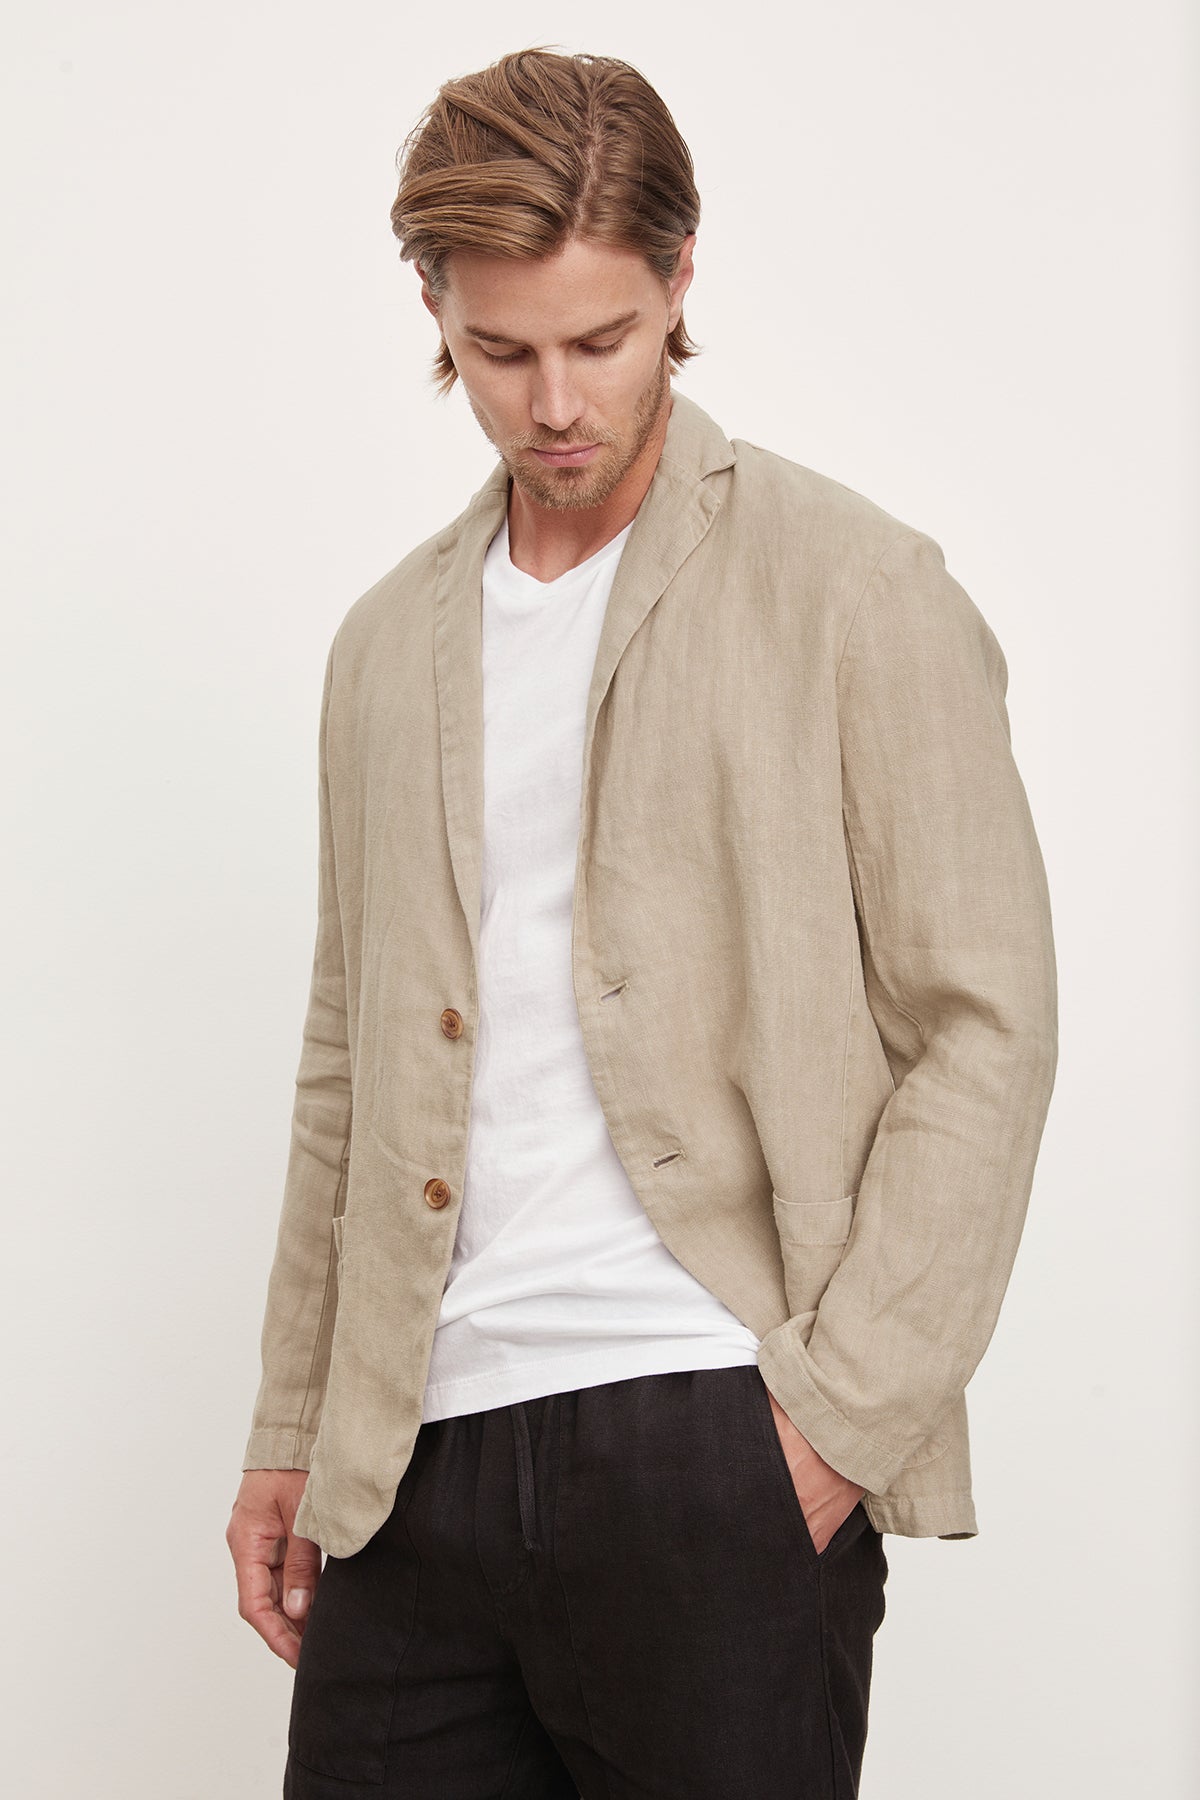   Man wearing a beige Joshua Linen Blazer by Velvet by Graham & Spencer over a white t-shirt, paired with Phelan Linen Pants, looking away thoughtfully. 